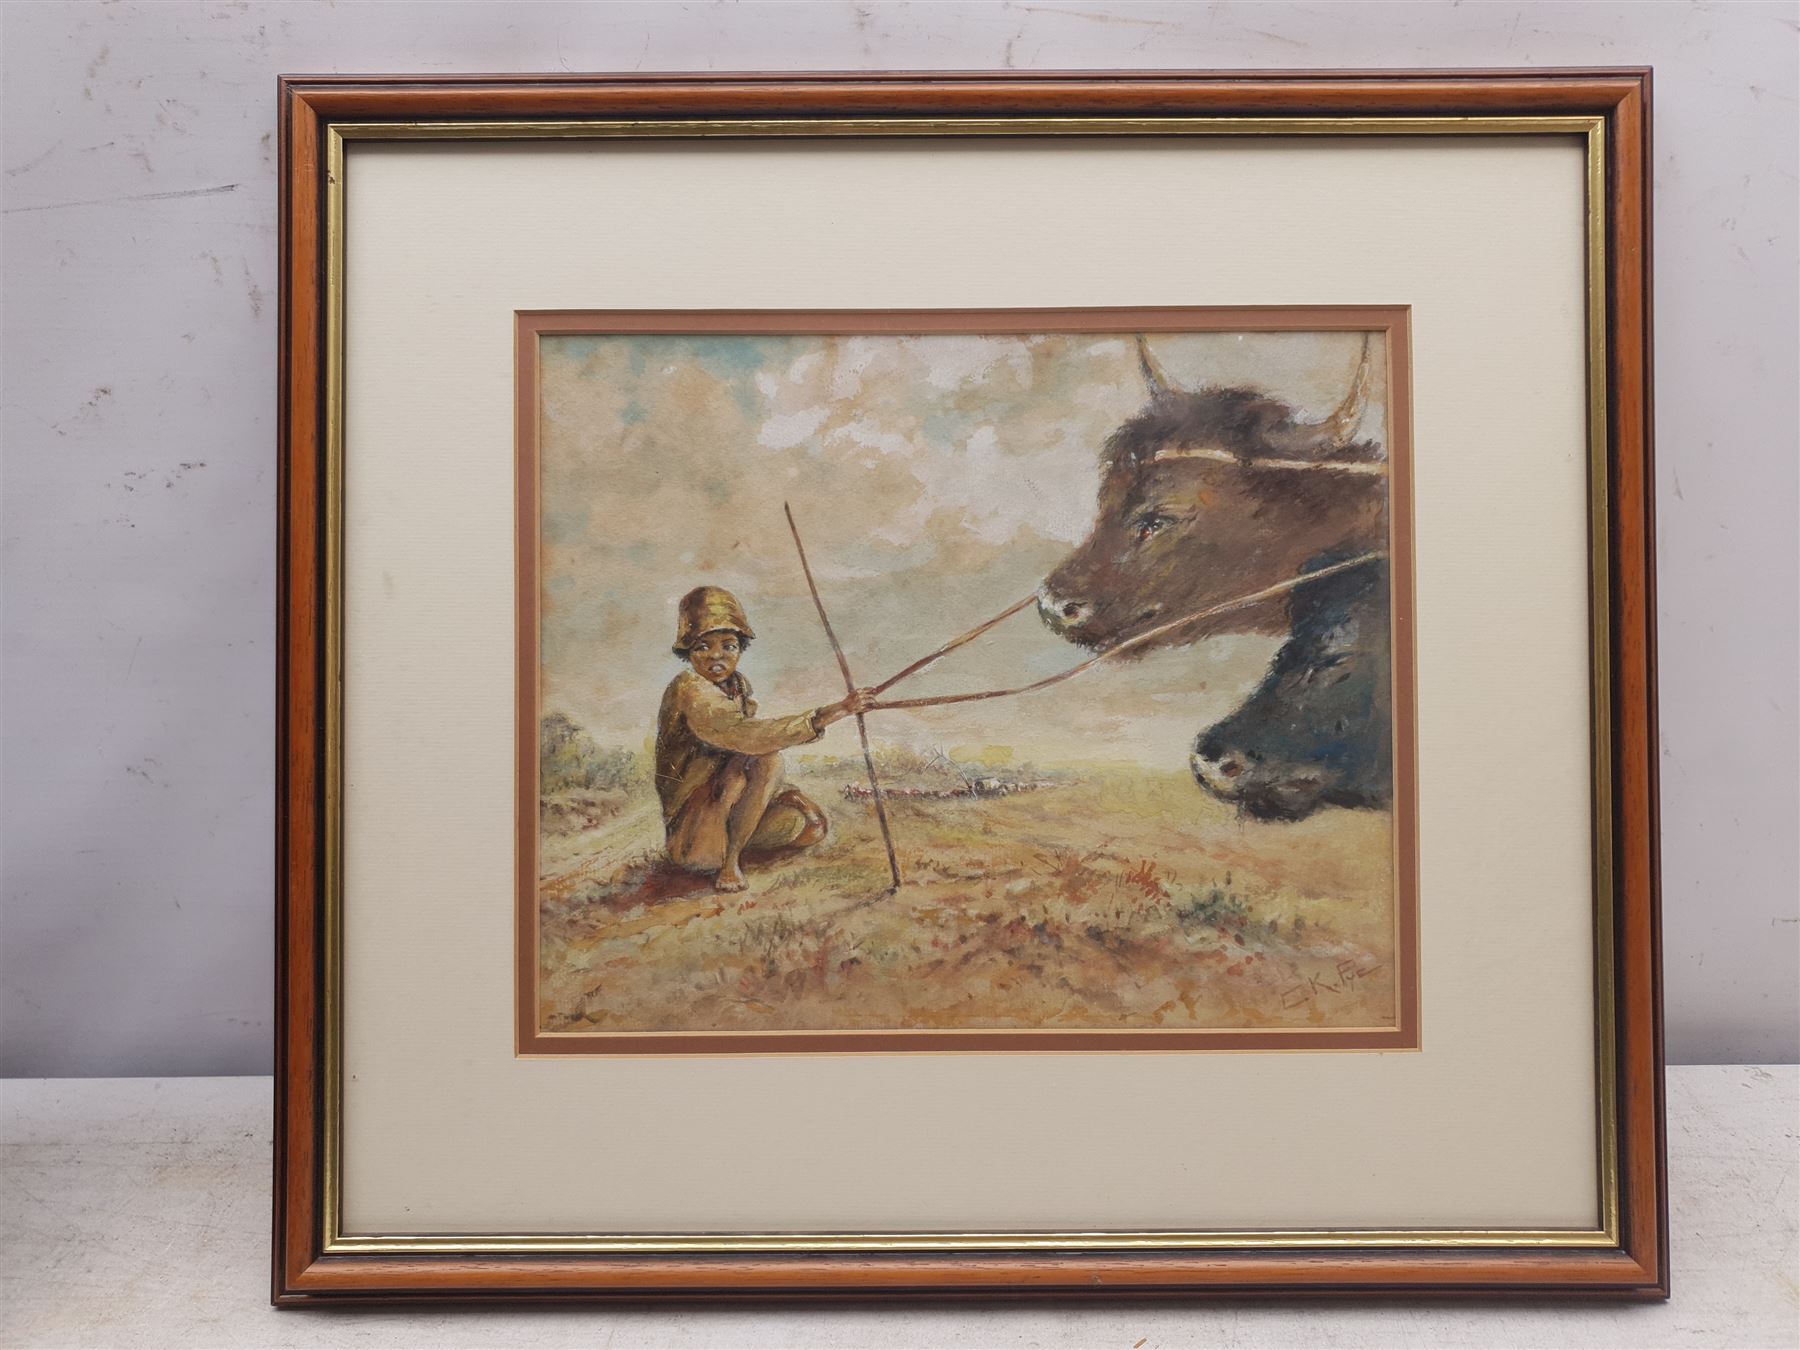 E K Pye (South African 20th century): Boy with Oxen - Image 2 of 4